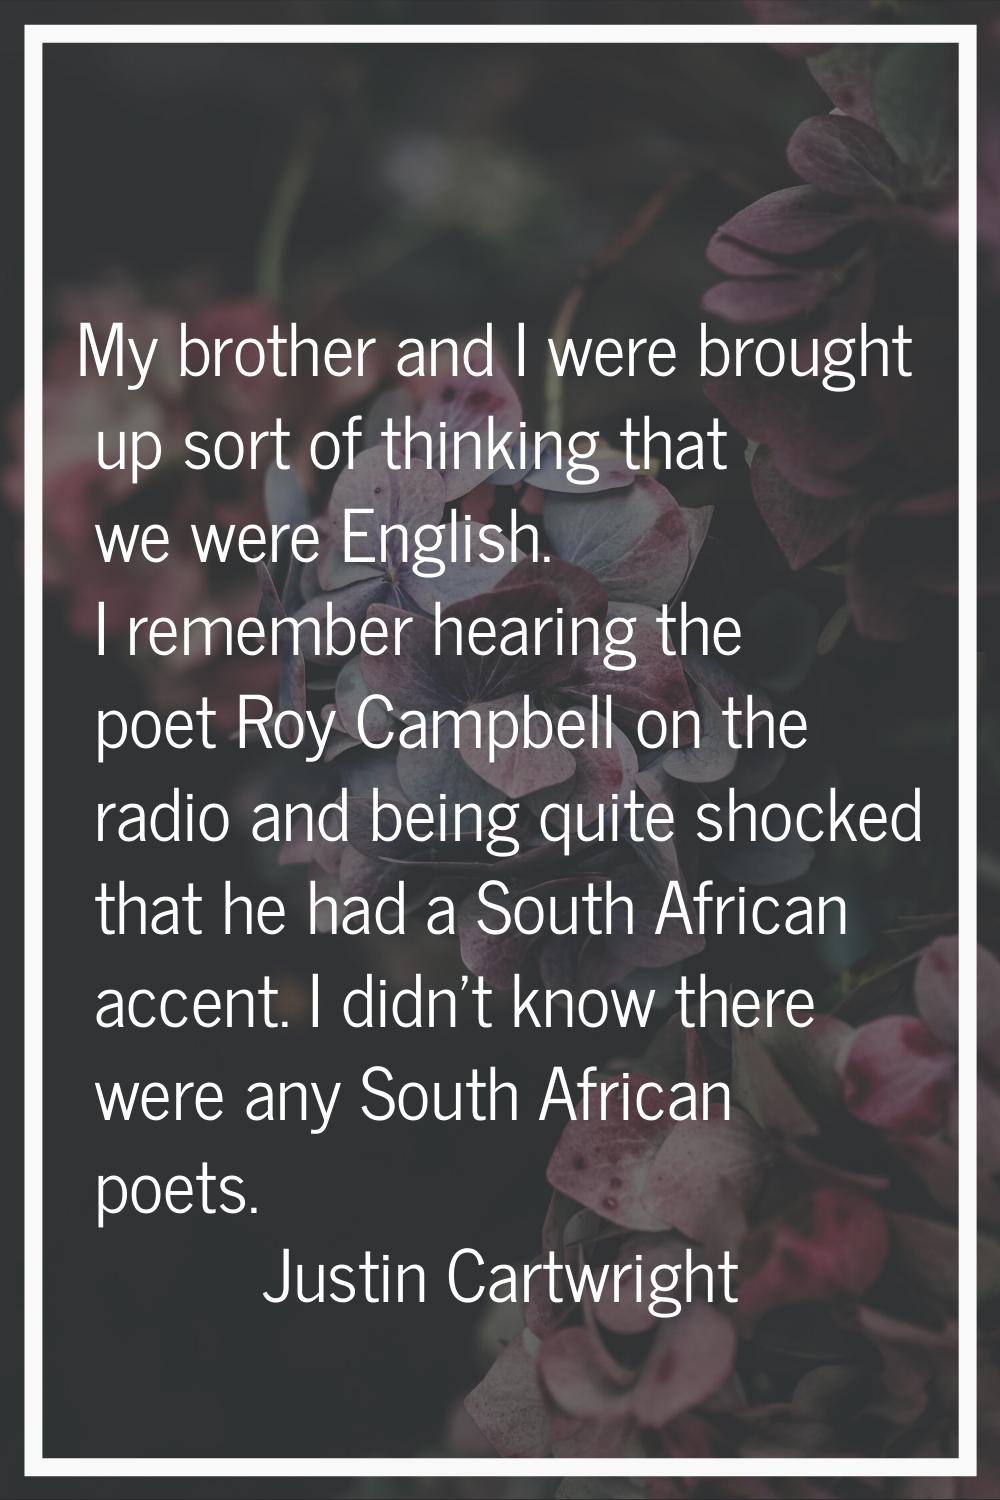 My brother and I were brought up sort of thinking that we were English. I remember hearing the poet